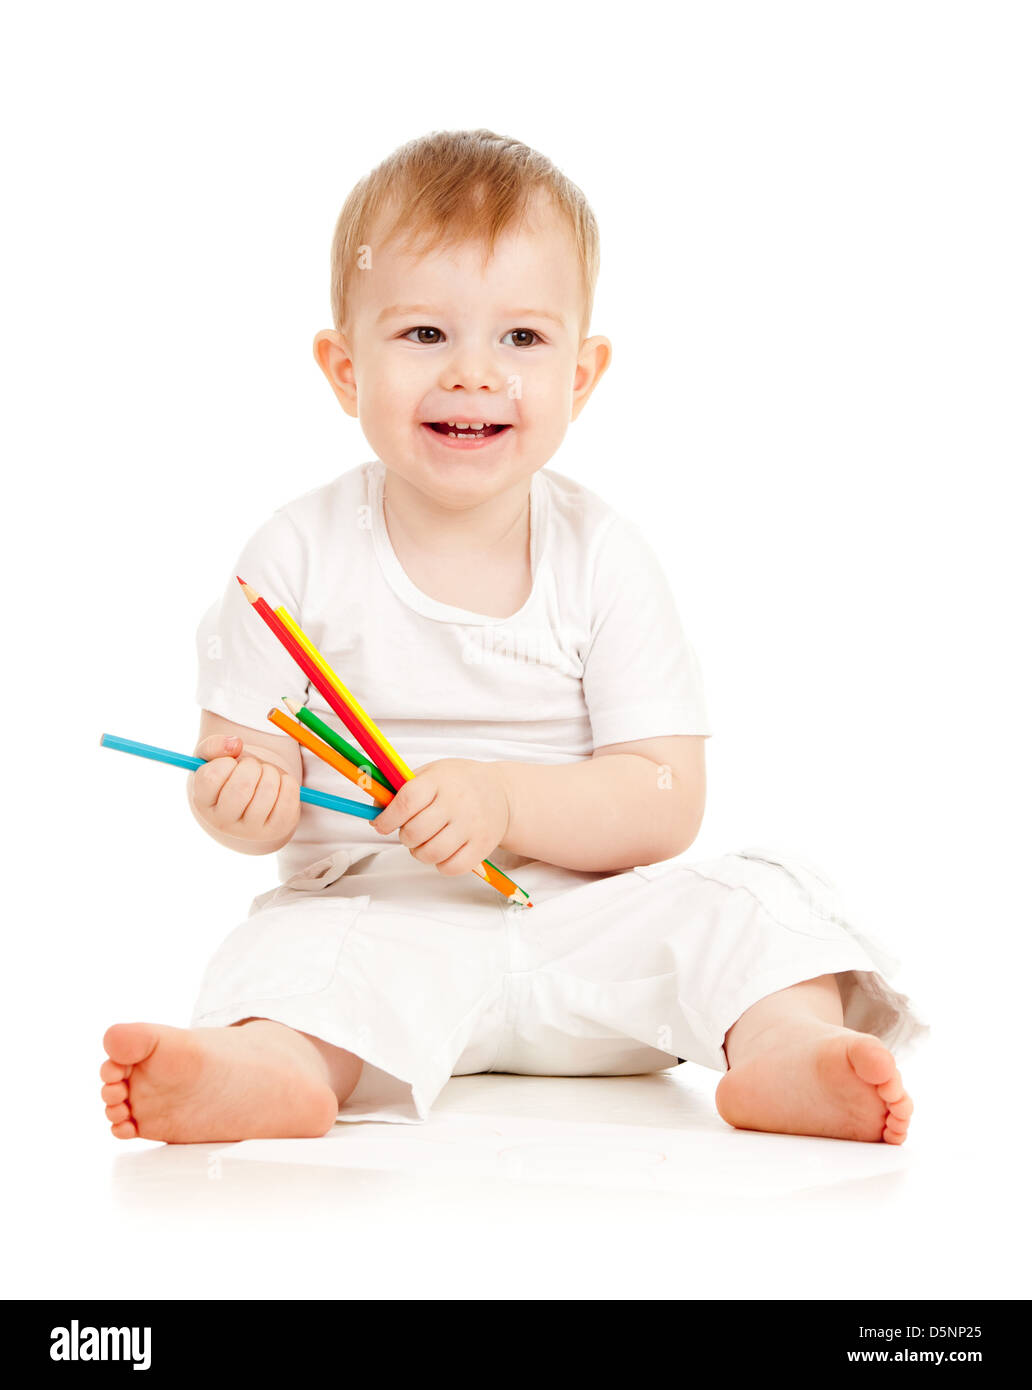 funny baby boy drawing with color pencils Stock Photo